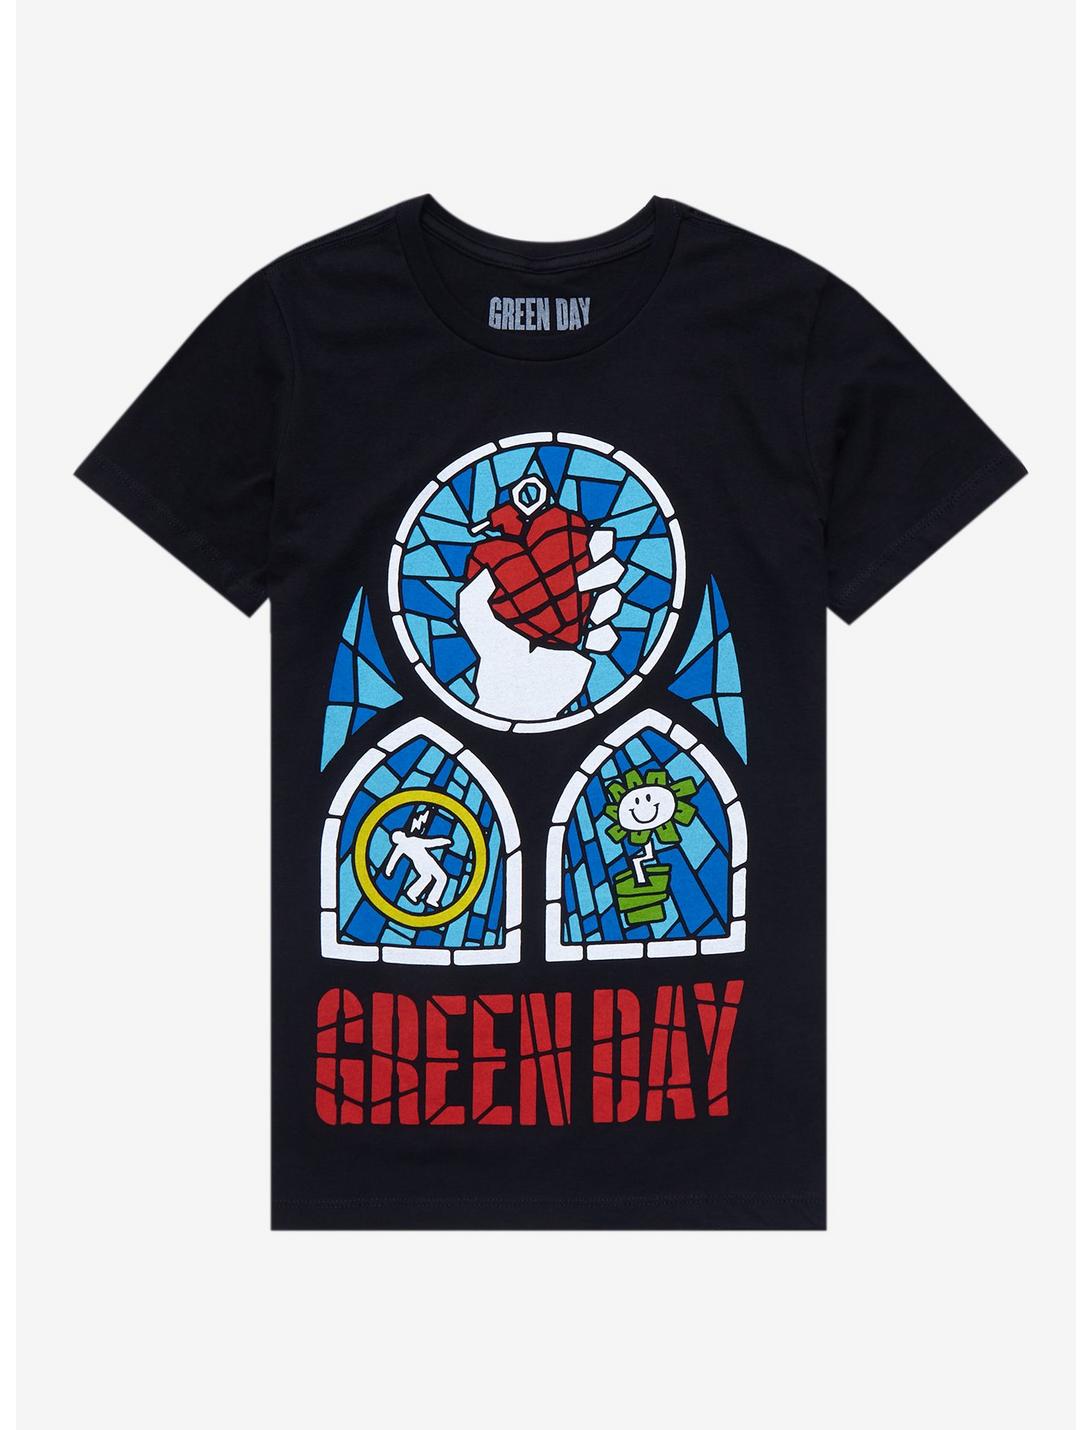 Green Day Stained Glass Album Covers Boyfriend Fit Girls T-Shirt, BLACK, hi-res